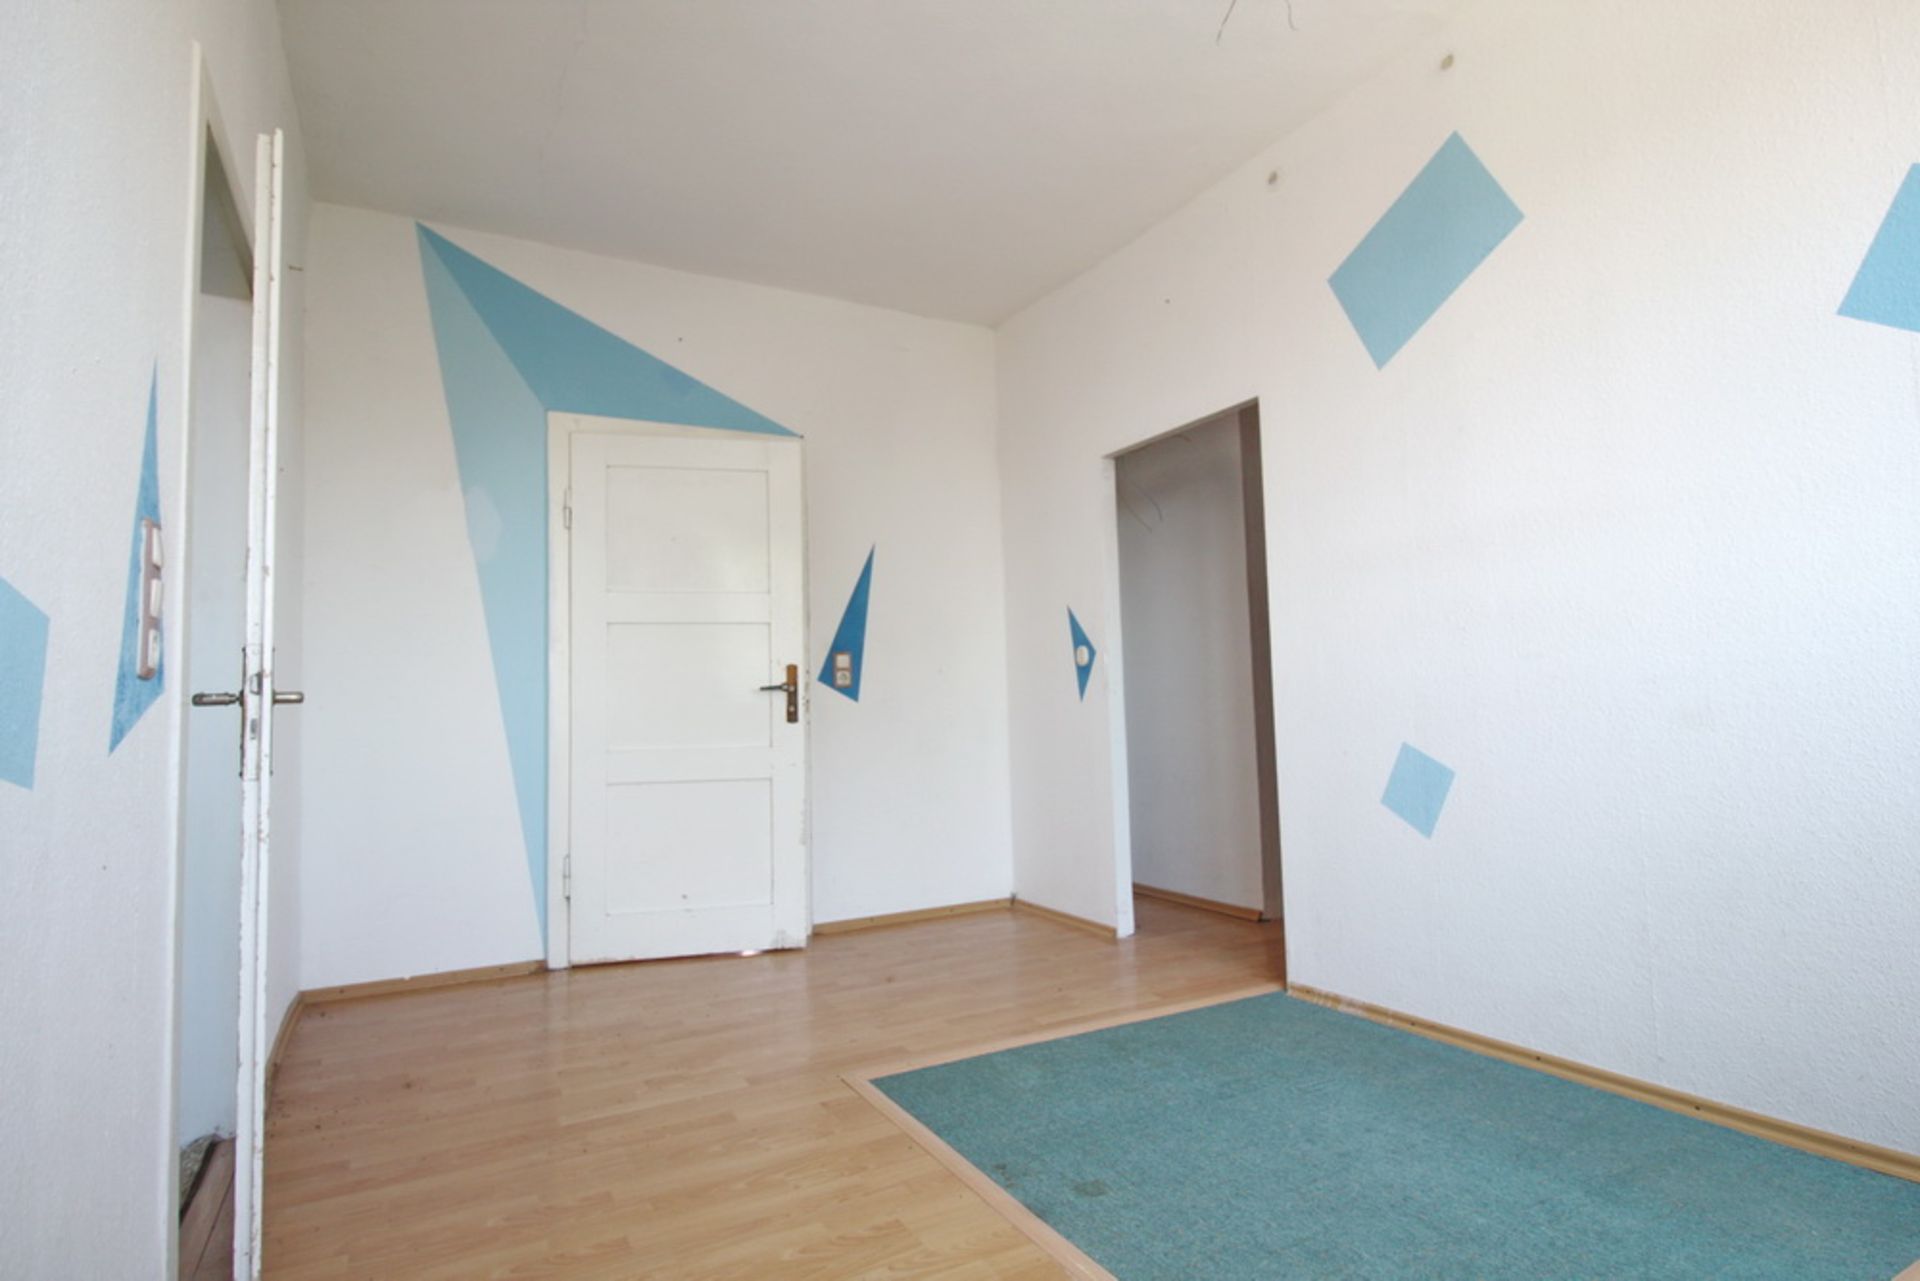 LARGE HOUSING BLOCK HORNSOMMEM, GERMANY READY TO MOVE INTO FREEHOLD VACANT POSSESSION - Image 69 of 91